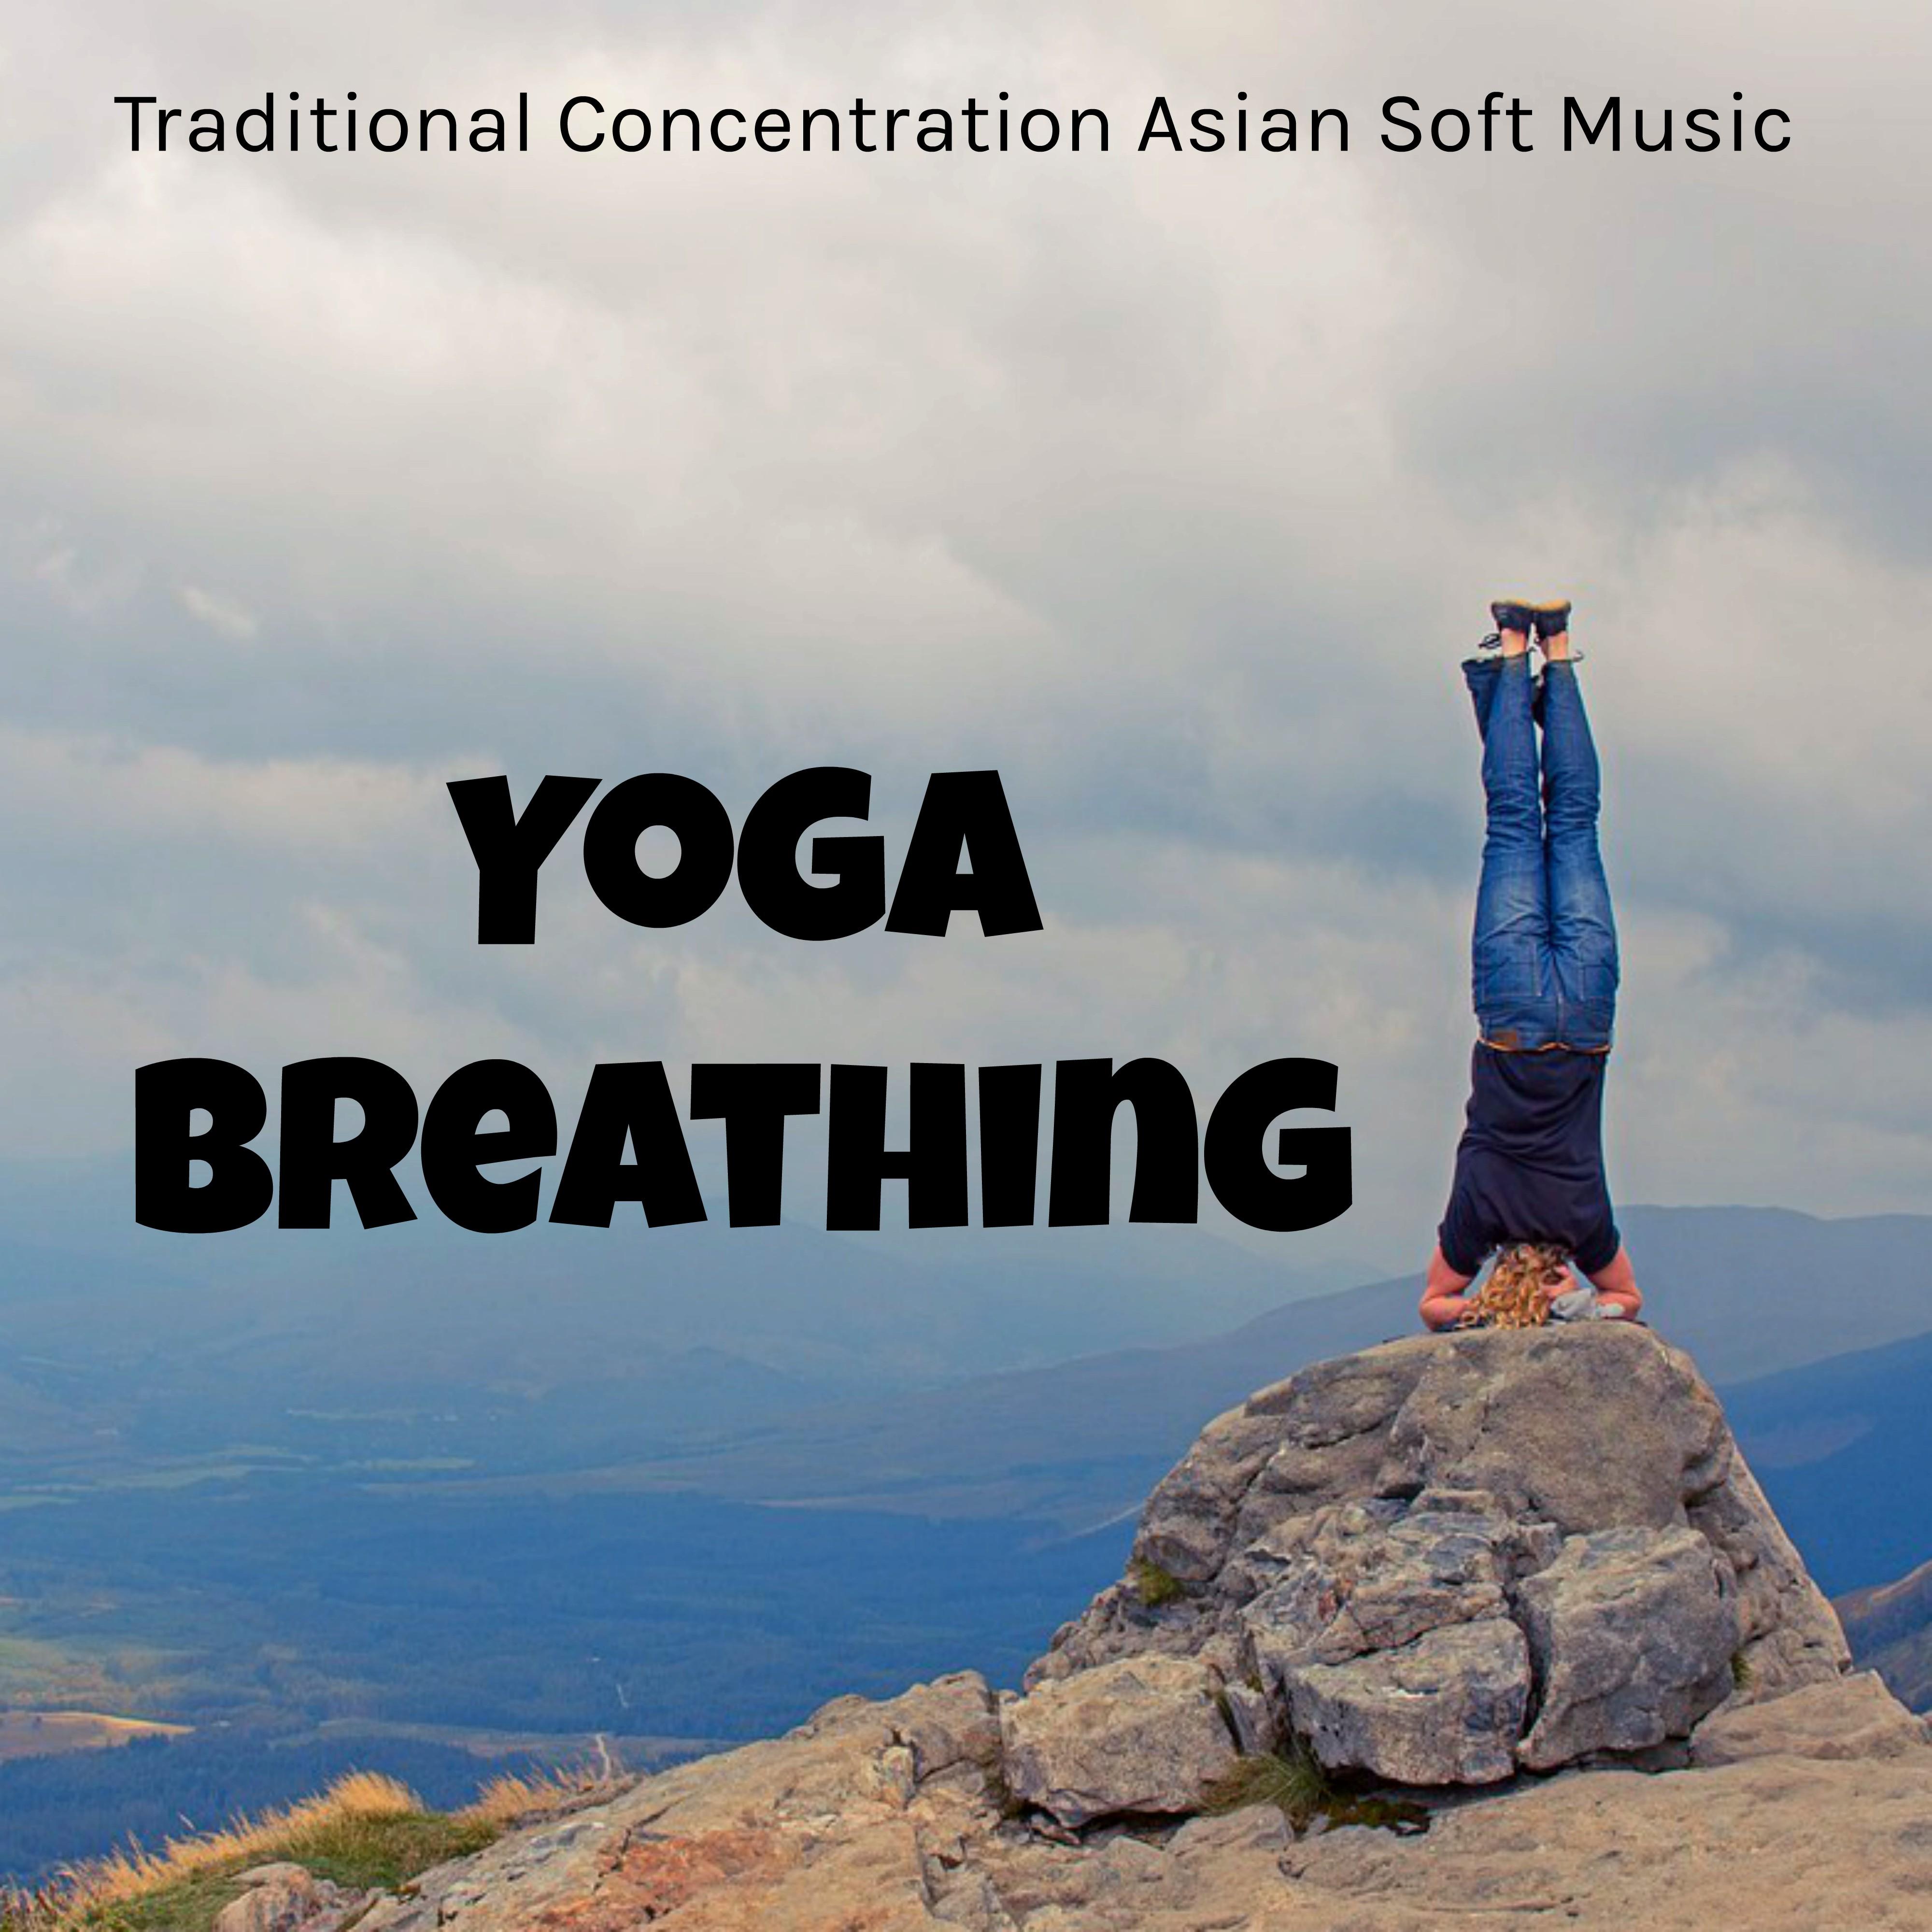 Yoga Breathing - Traditional Concentration Asian Soft Music for Deep Relaxation and Mindfulness Therapy